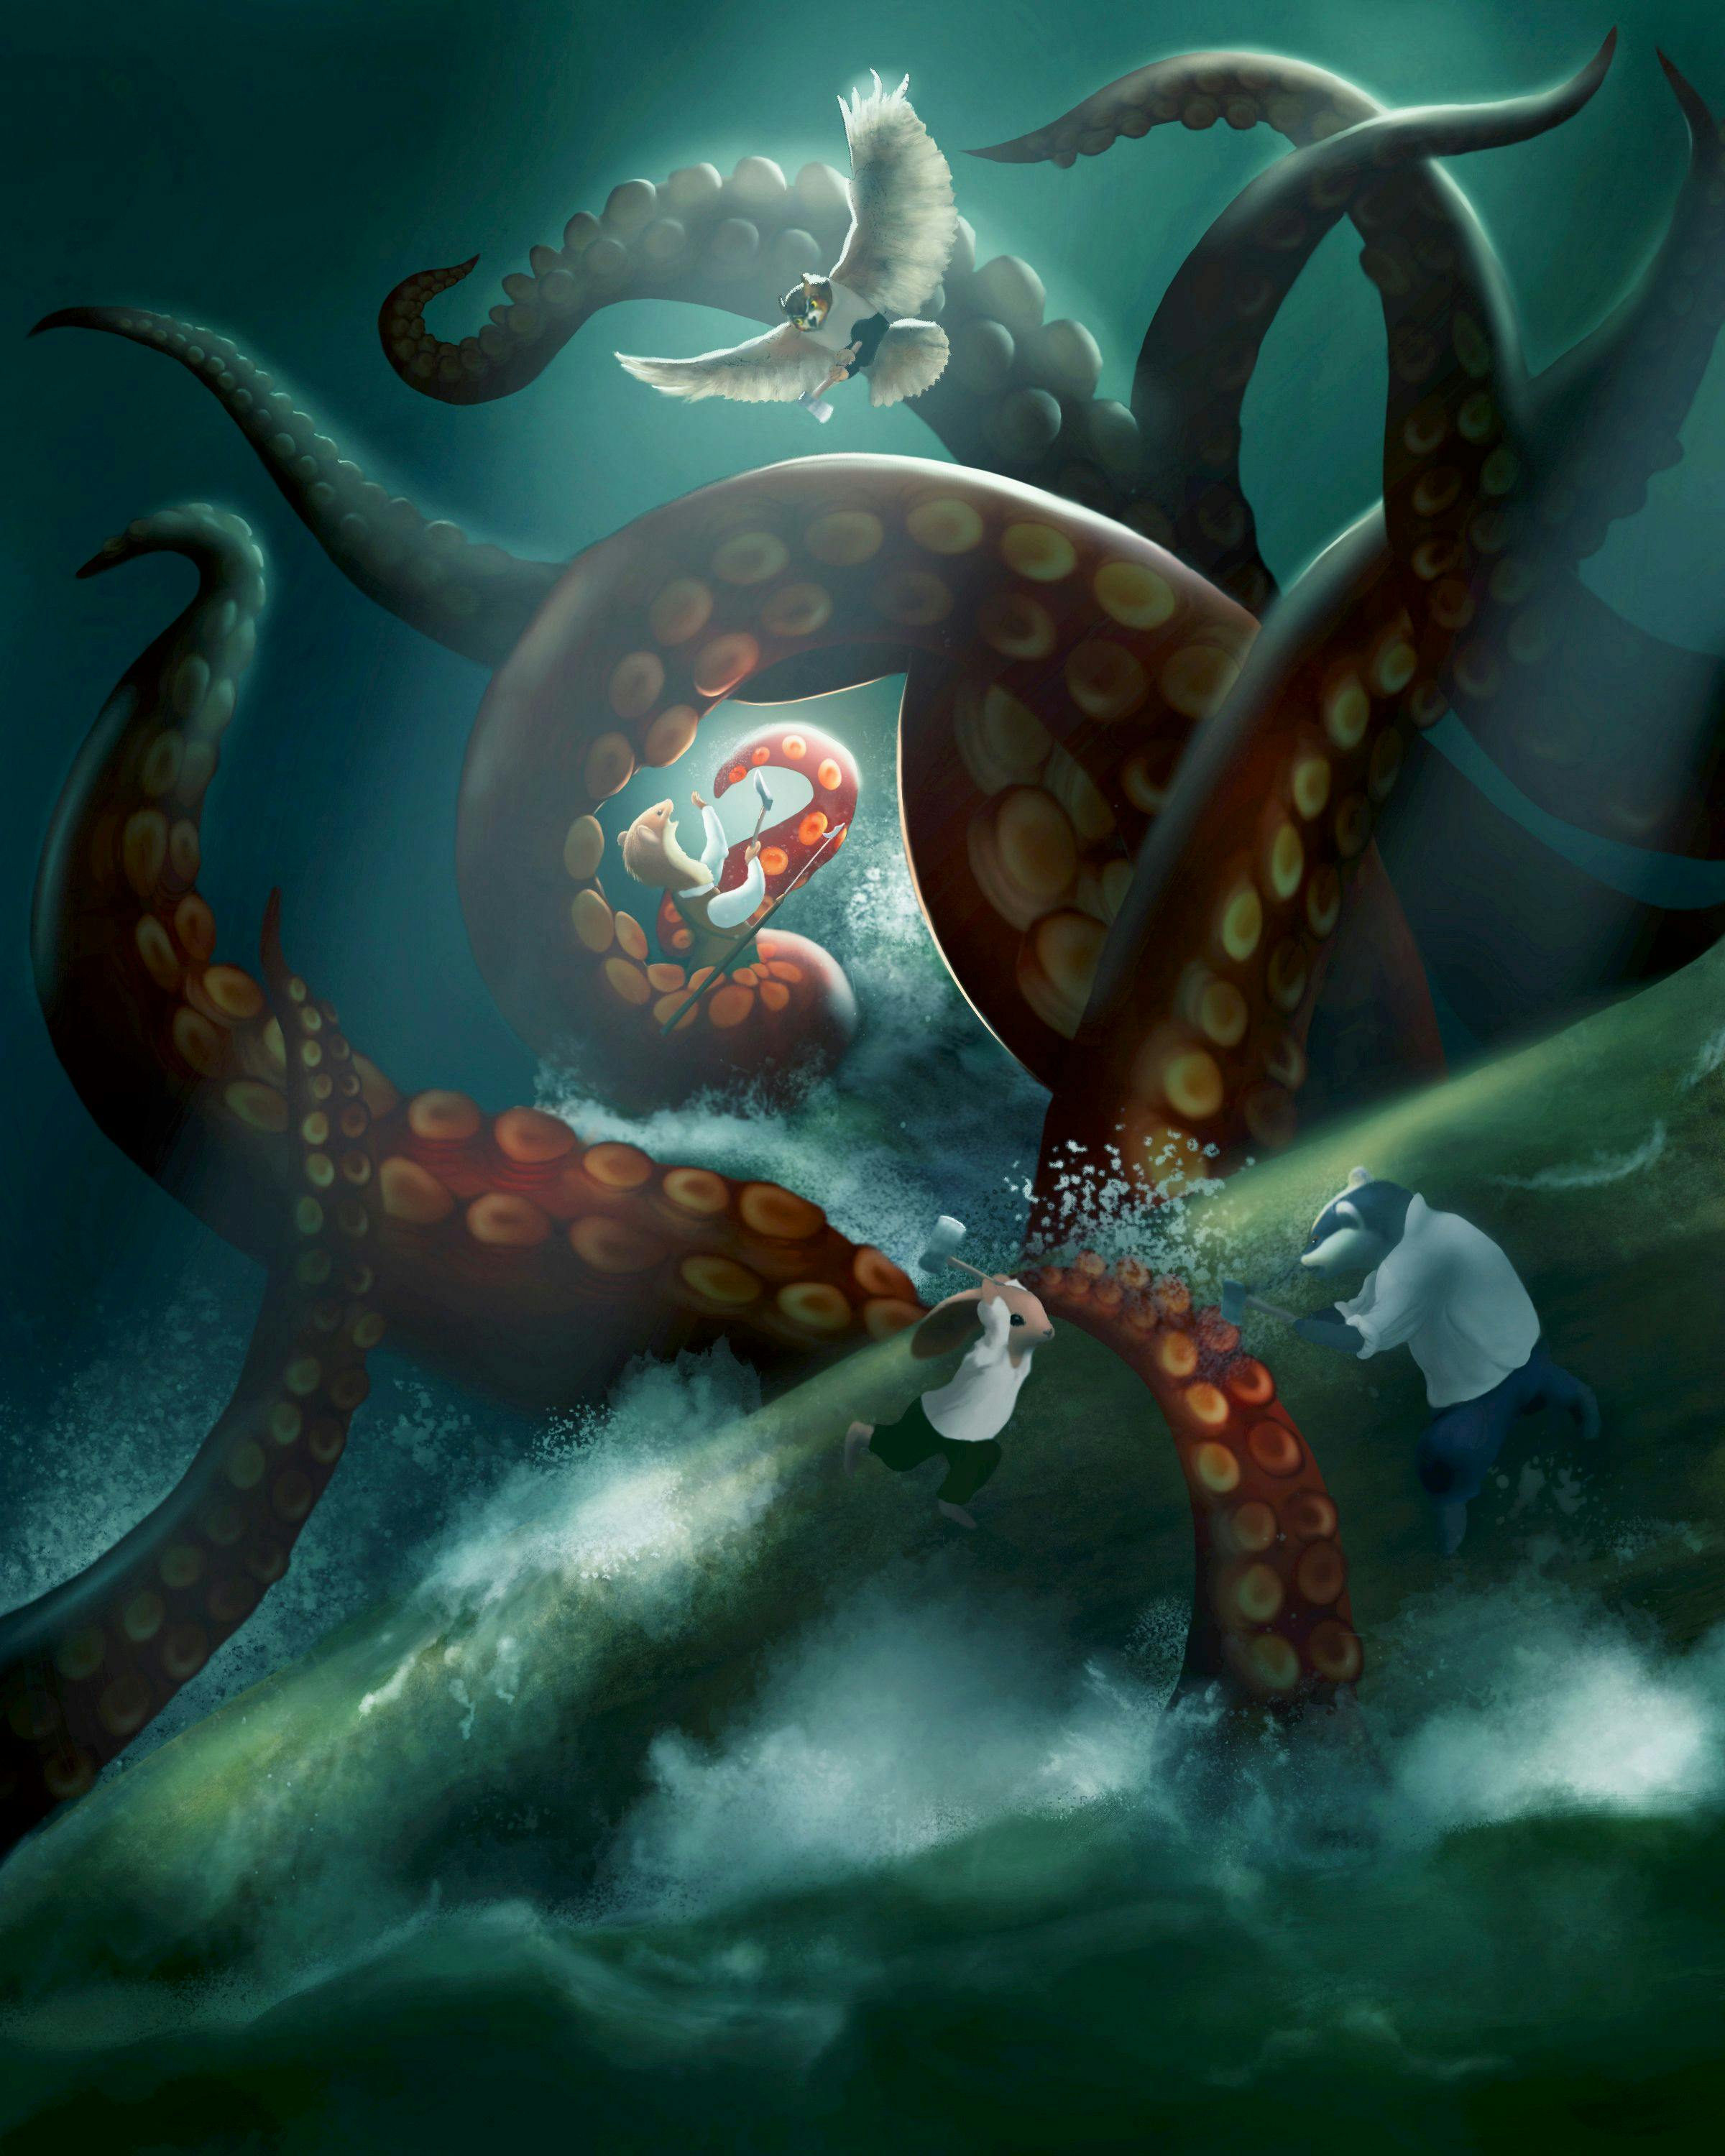 A giant octopus attacking in the sea